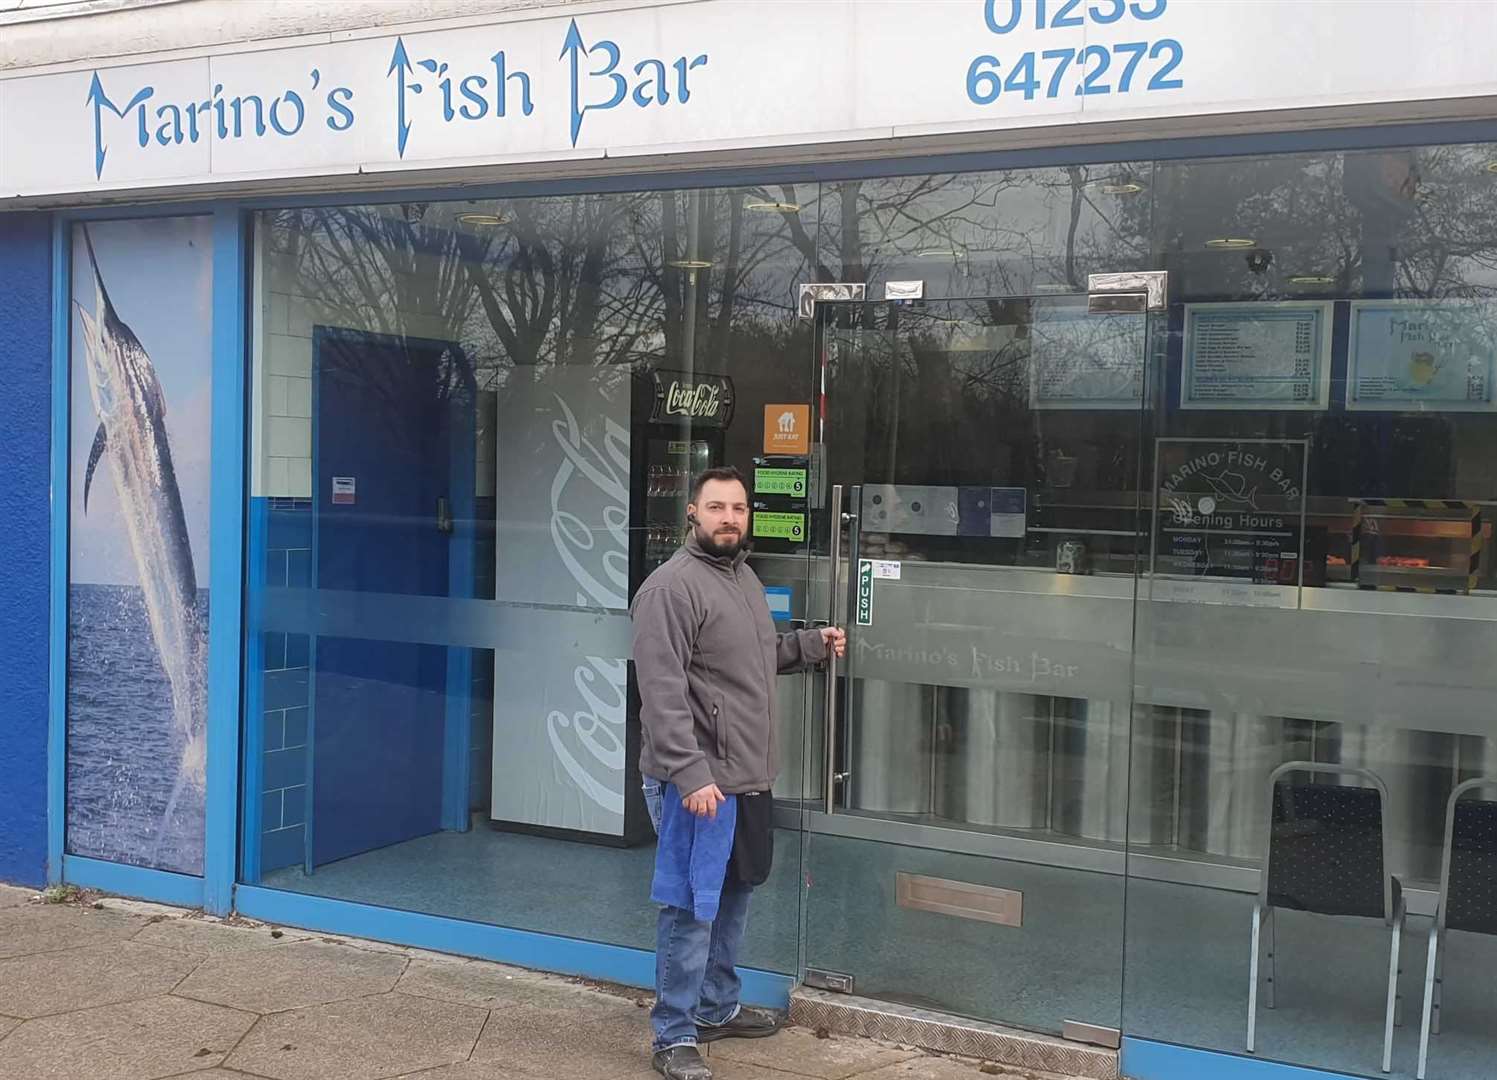 Orthy Karios, owner of Marino's Fish Bar, says lunchtime trade has significantly fallen since the layby was closed